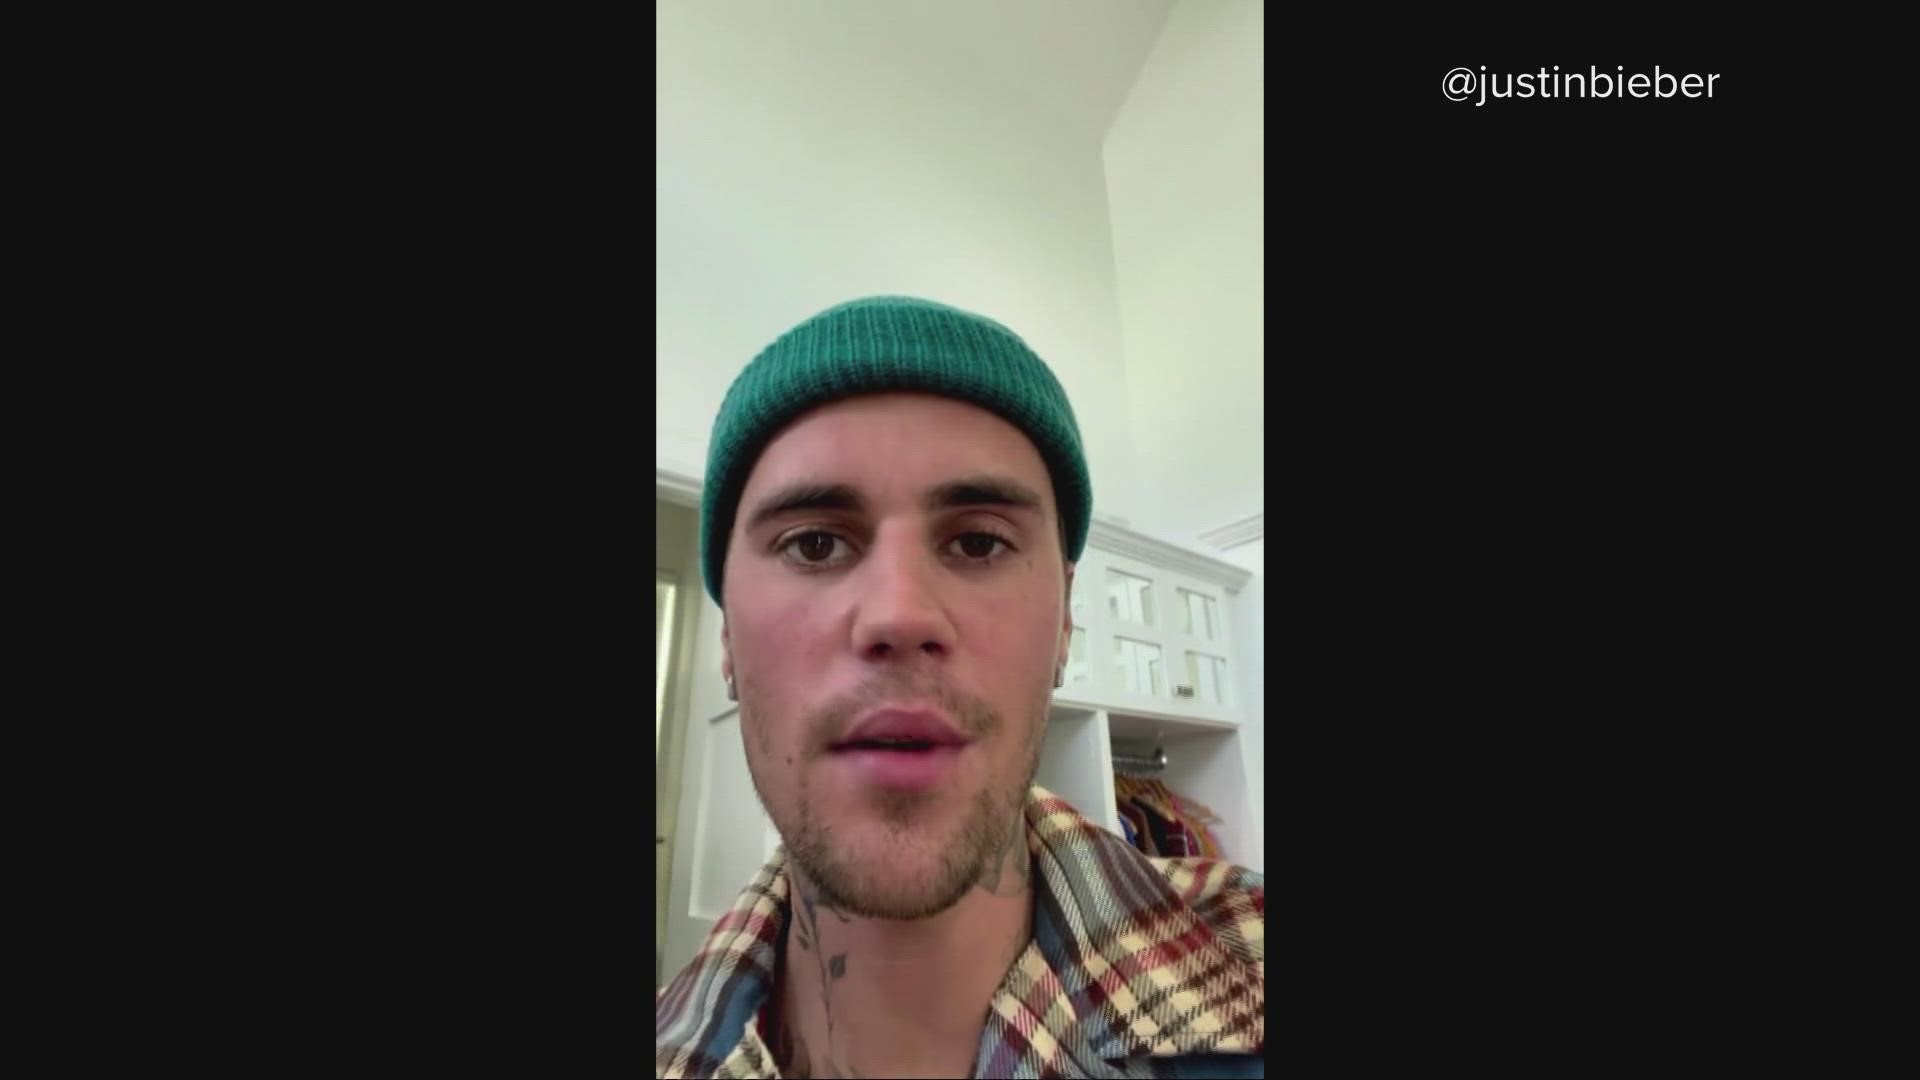 Bieber demonstrated in a video that he could barely move one side of his face, calling the ailment “pretty serious.”